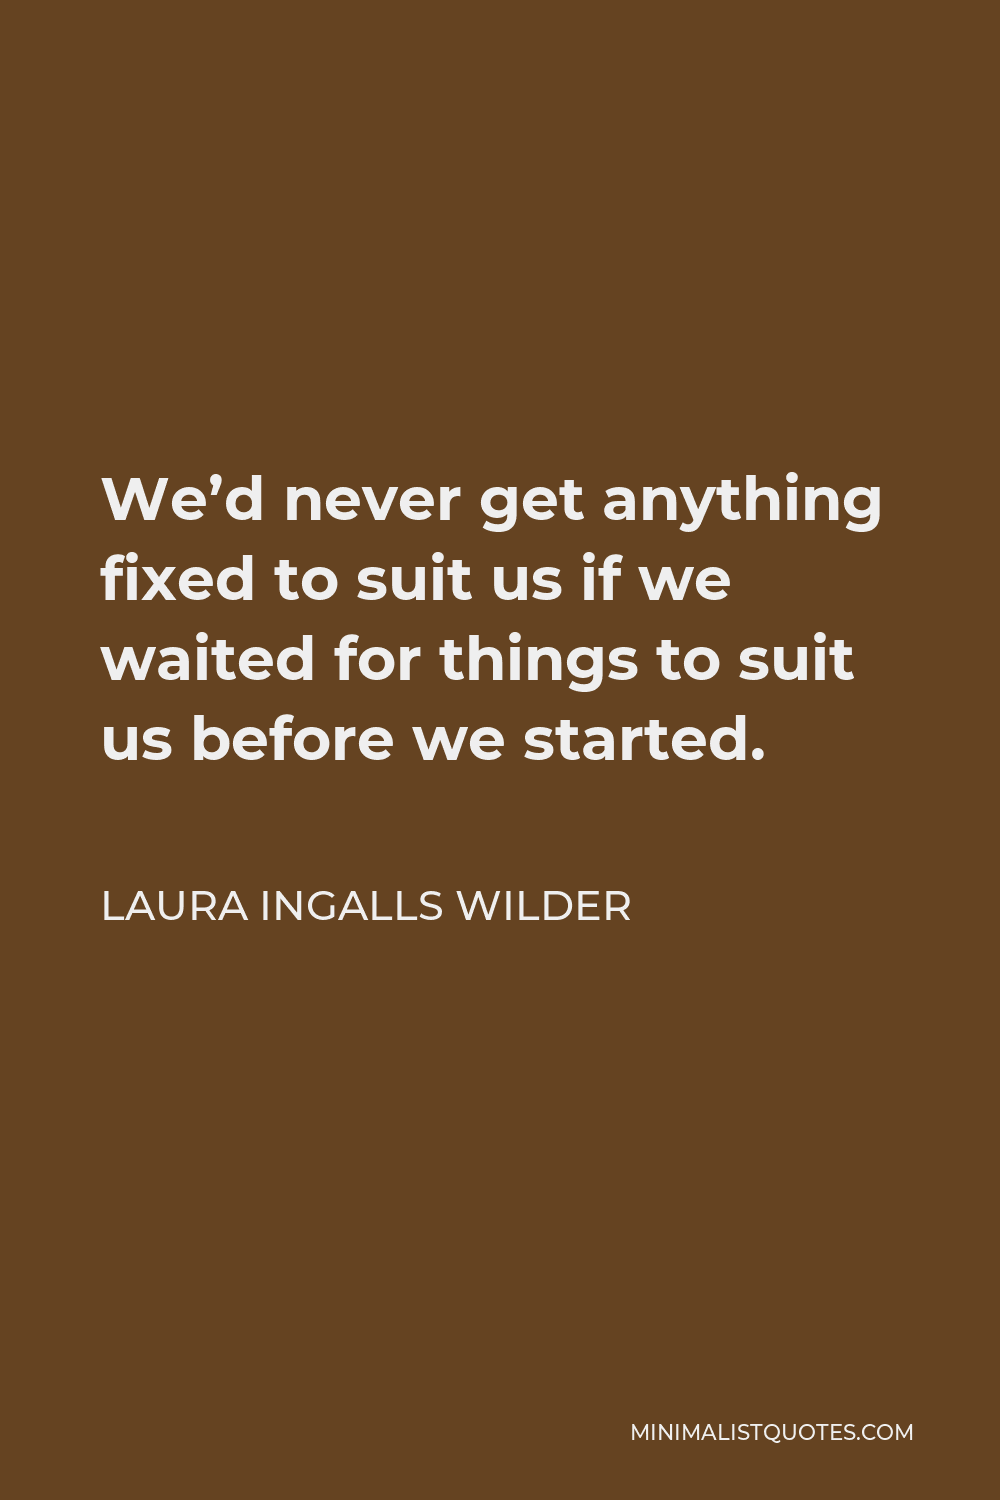 Laura Ingalls Wilder Quote - We’d never get anything fixed to suit us if we waited for things to suit us before we started.